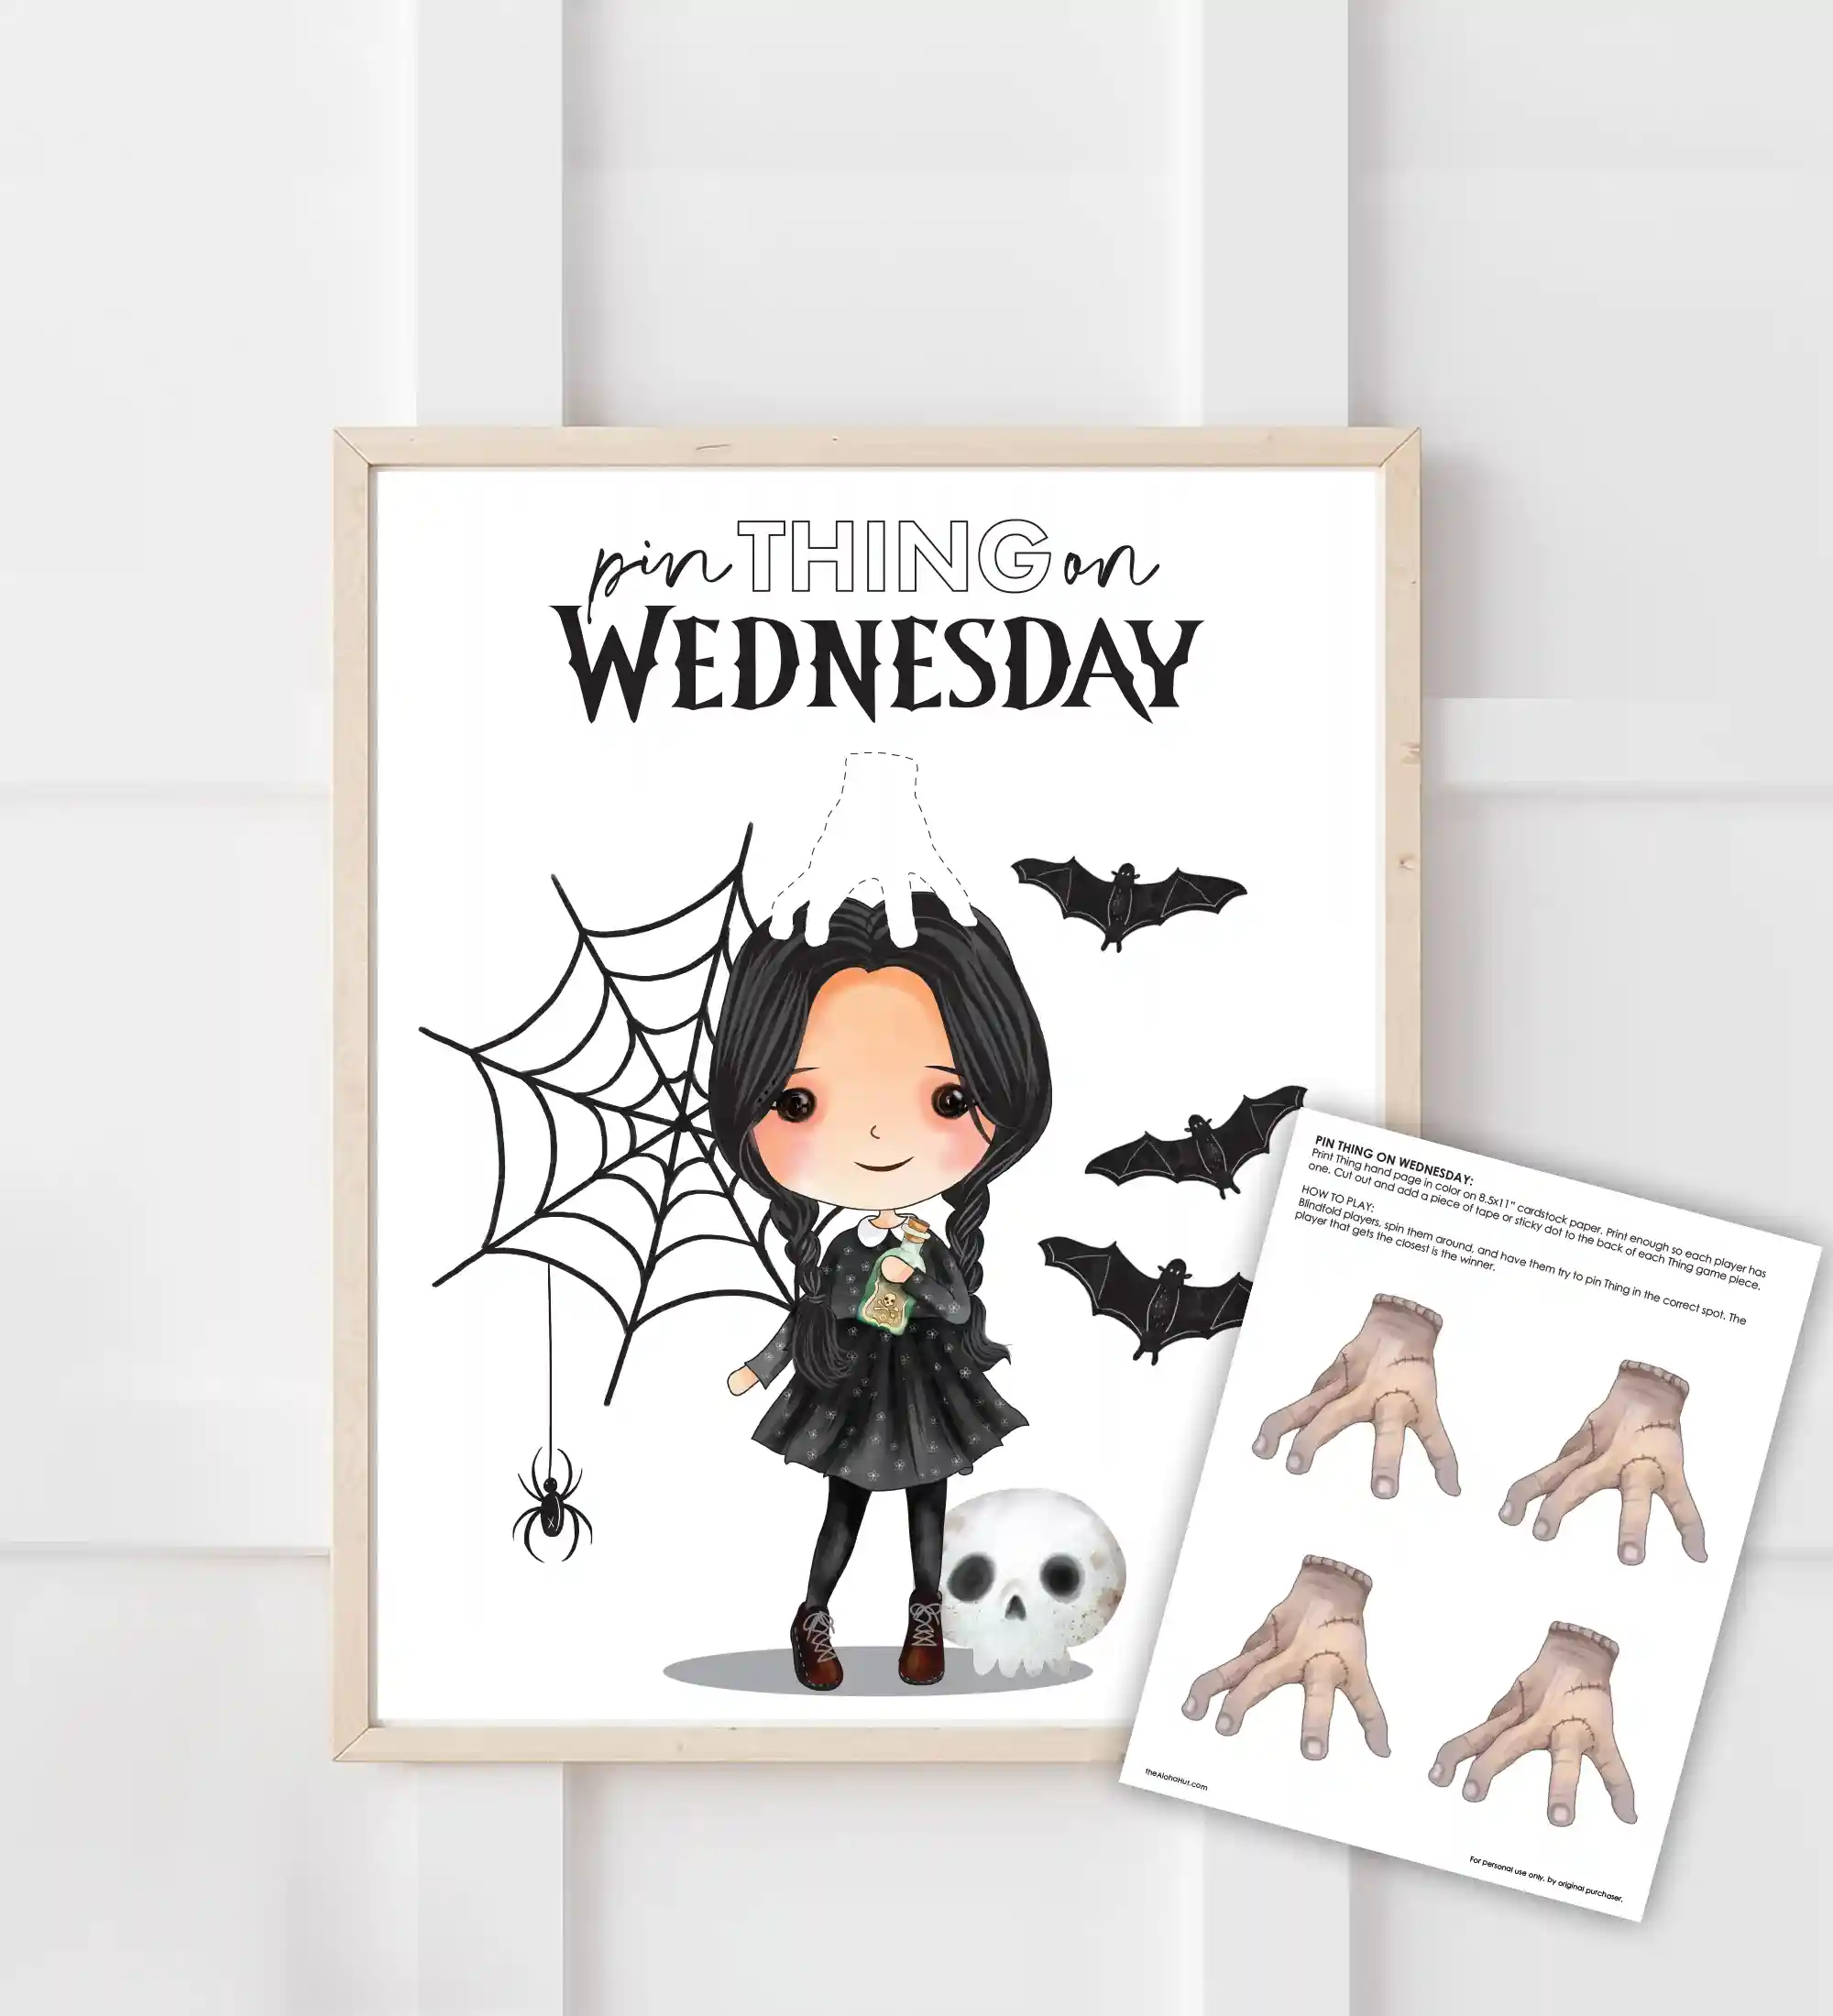 Addams family party game called Pin Thing on Wednesday. Pin Thing on Wednesday is similar to pin the tail games and is super fun and easy for kids of all ages to play. Download the printables for a Wednesday birthday party, Addams Family themed baby shower, or a Wednesday viewing party.